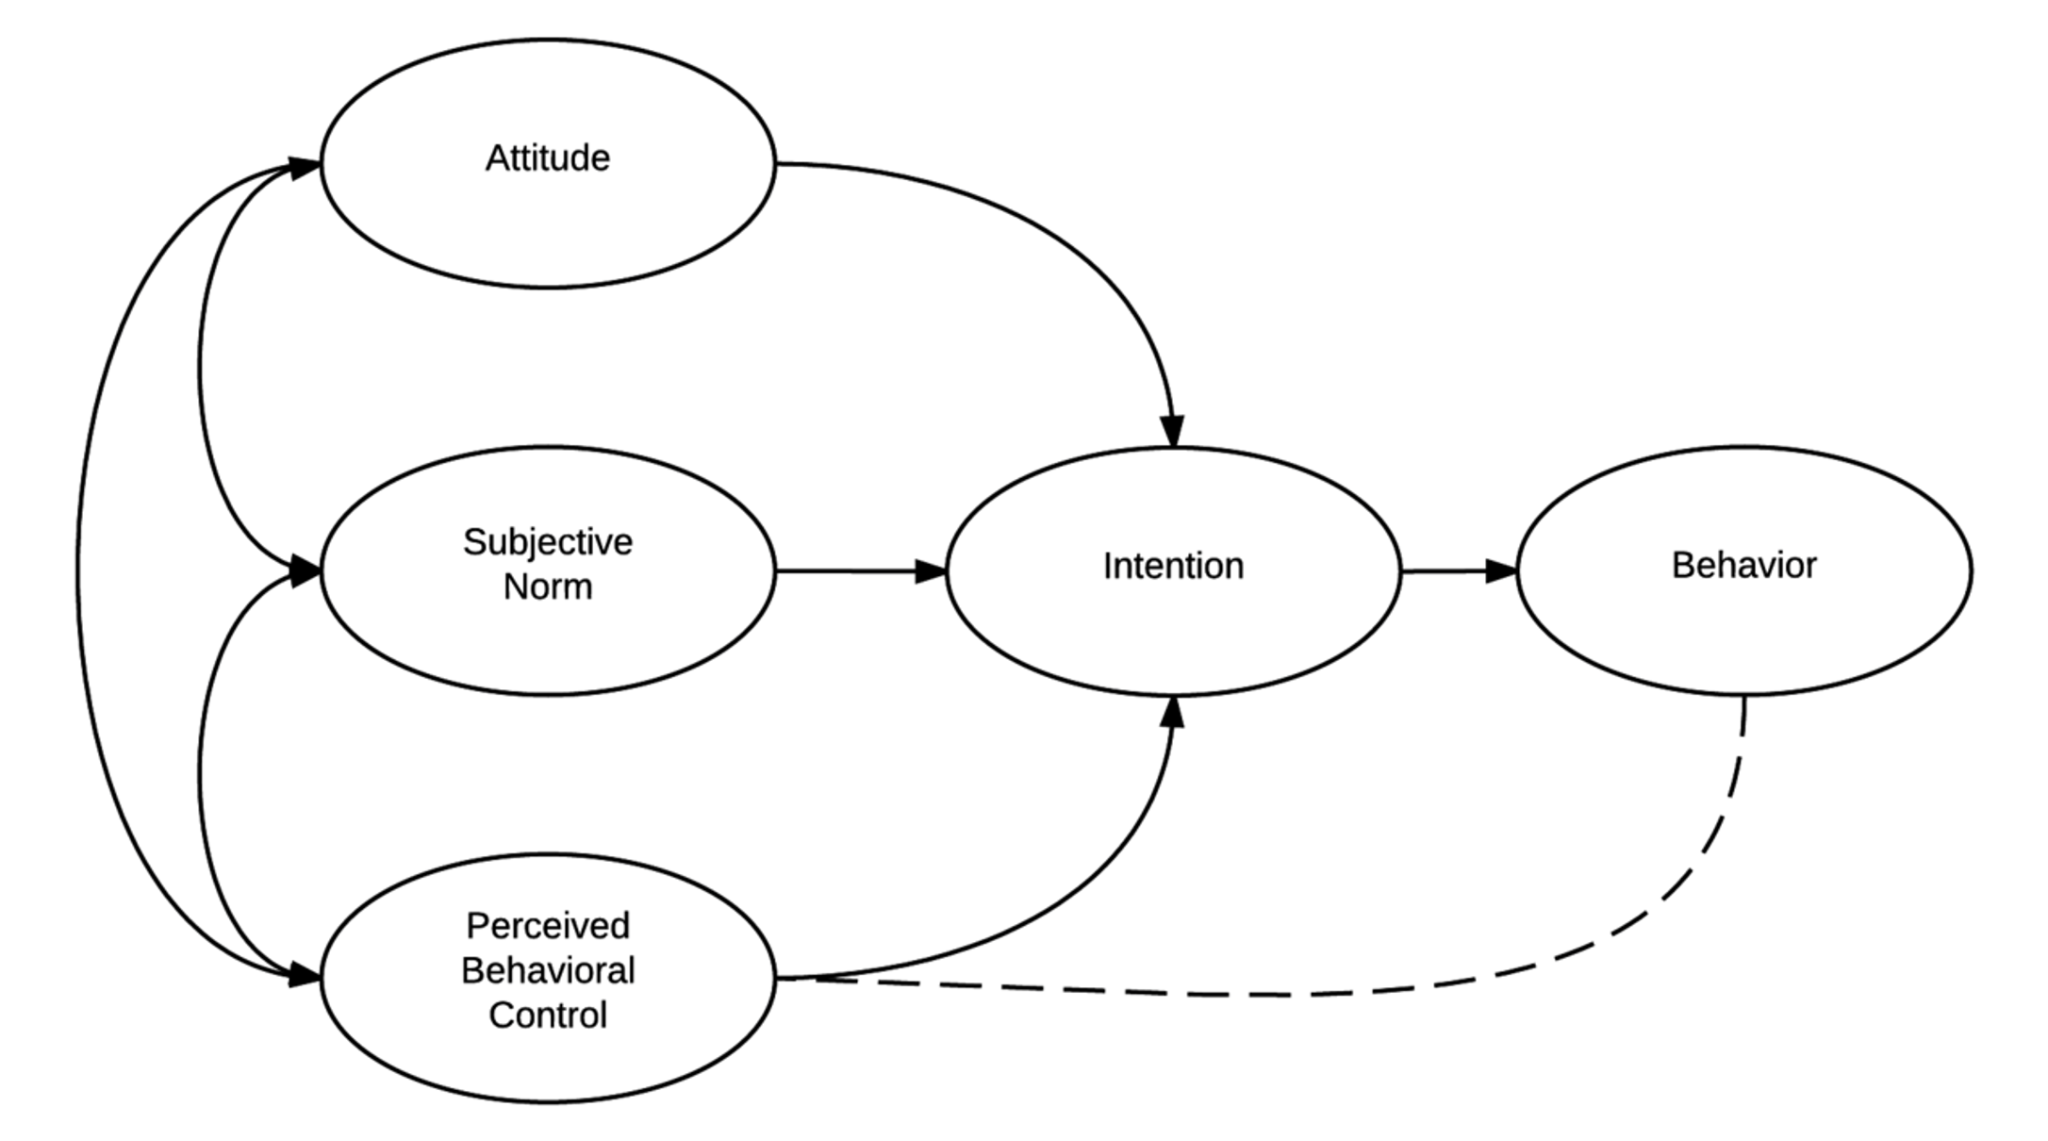 Ajzen's Theory of Planned Behavior (1991)